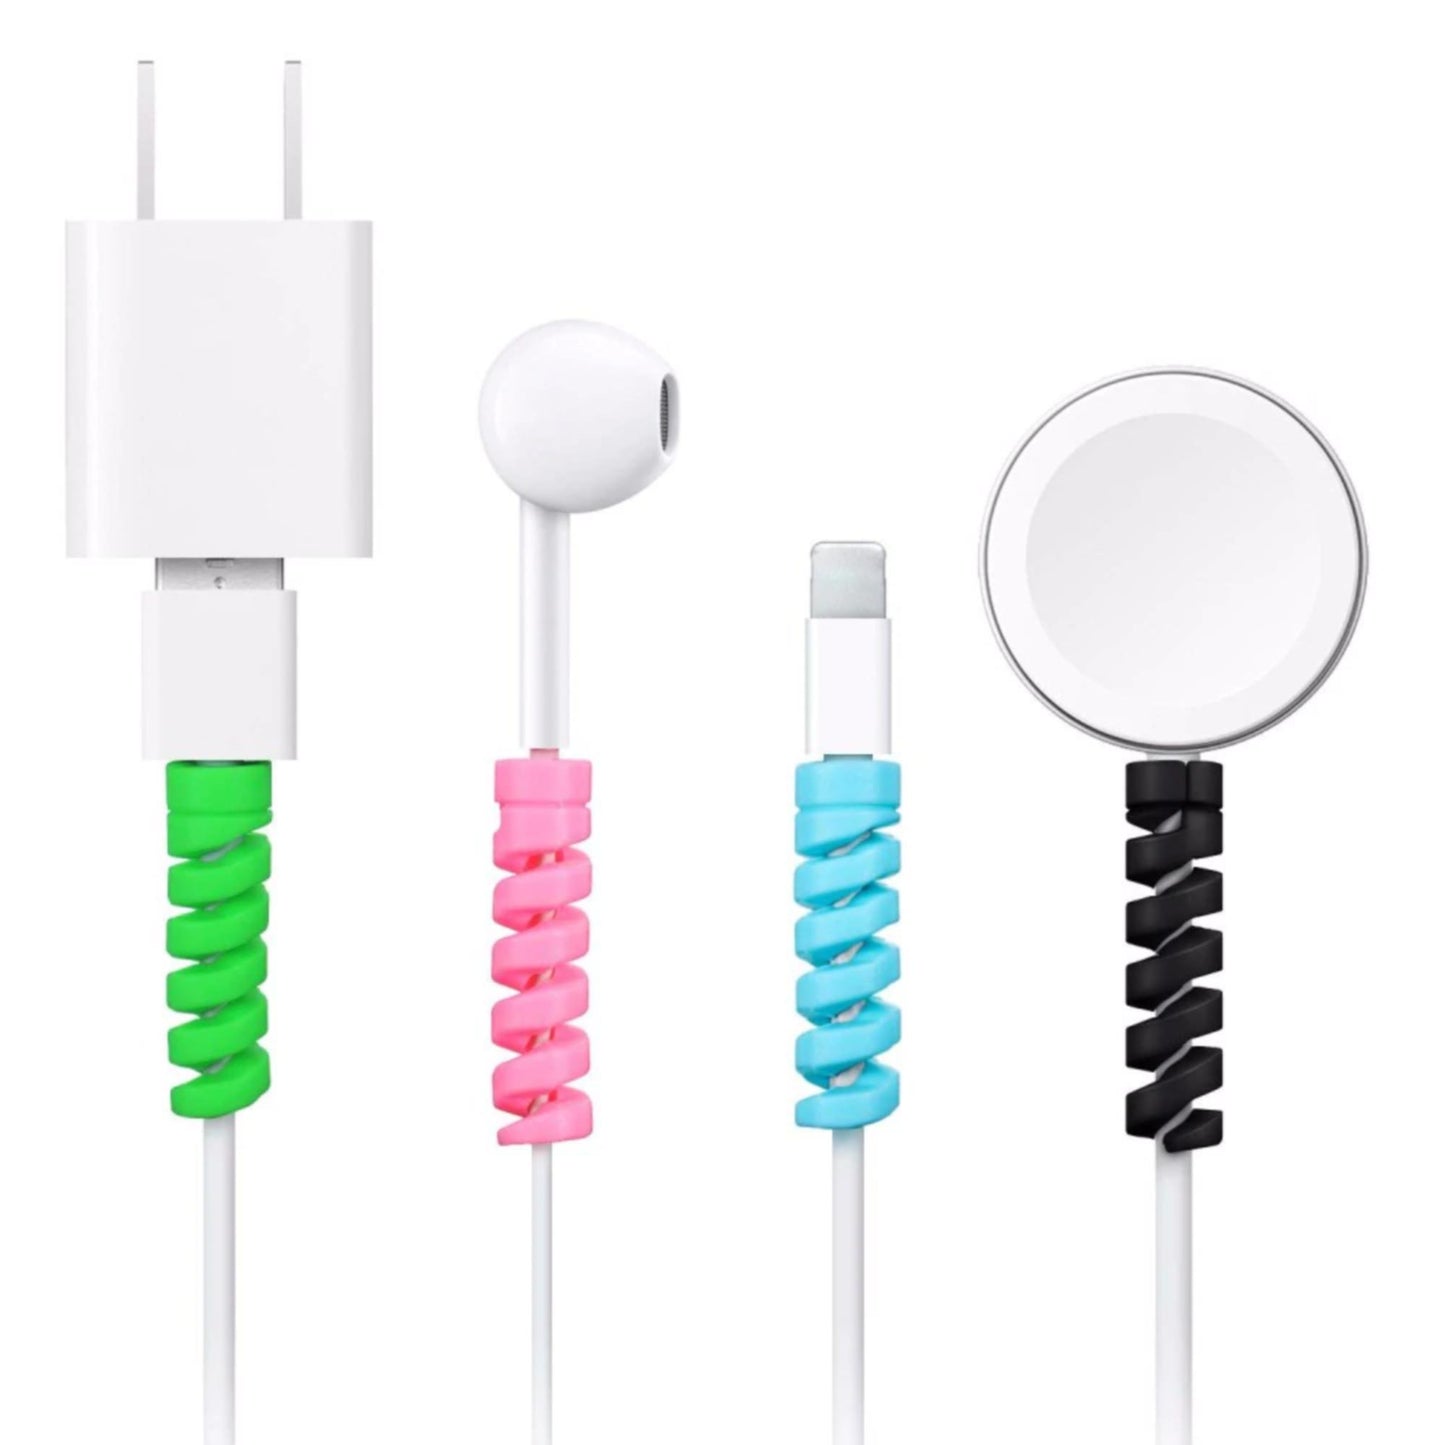 4 Pcs Spiral Silicone Cable Protector For Android / Iphone